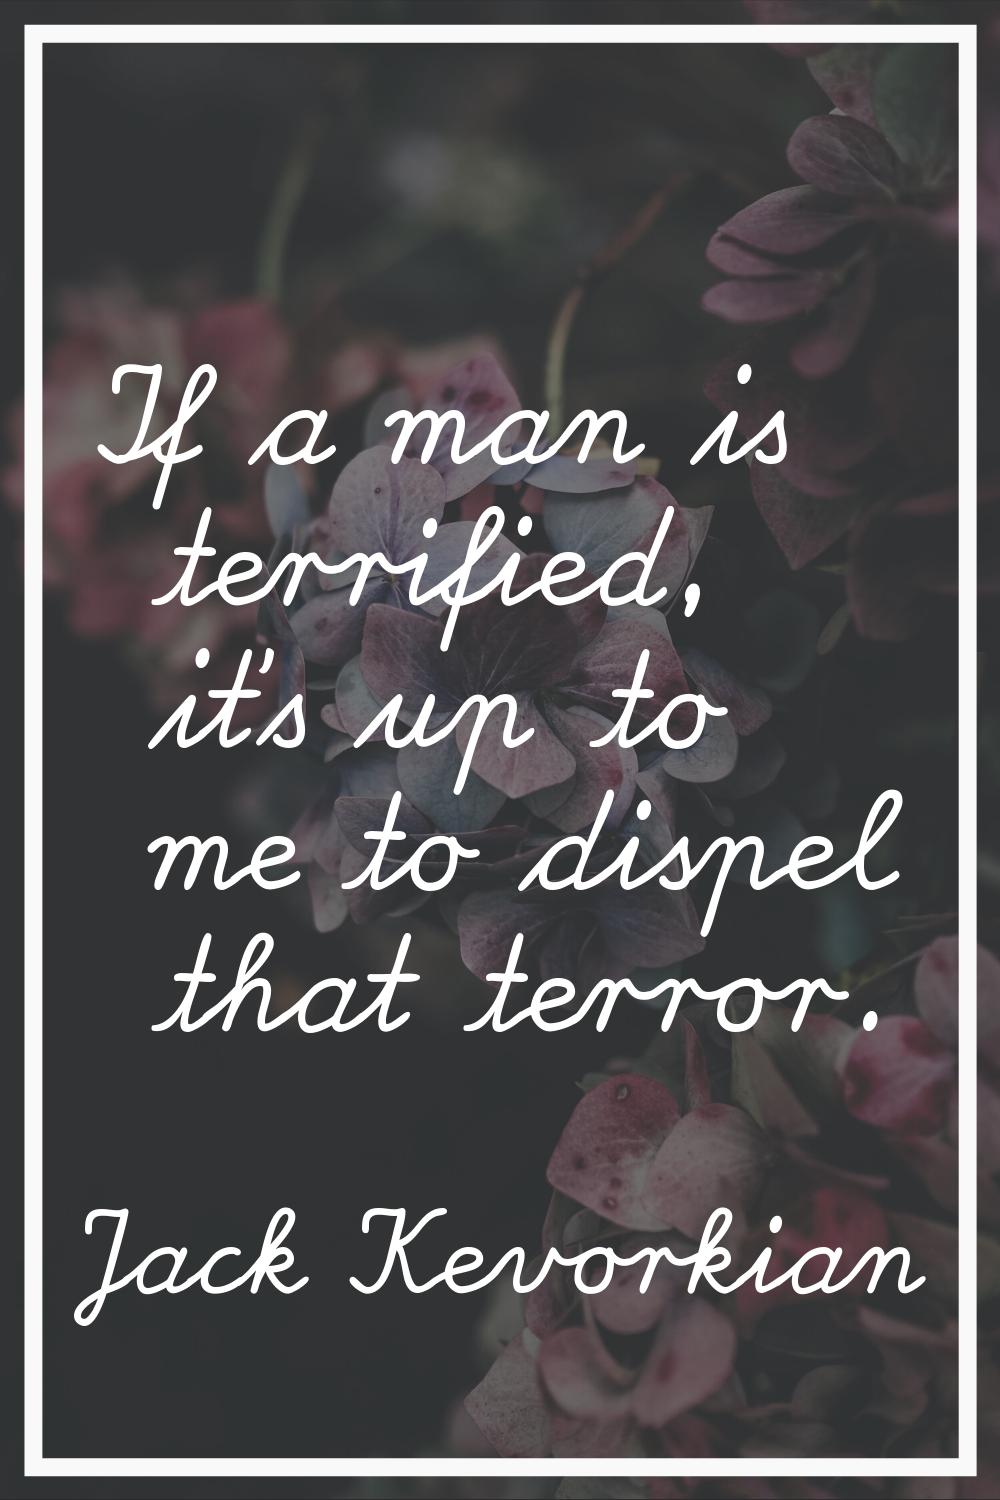 If a man is terrified, it's up to me to dispel that terror.